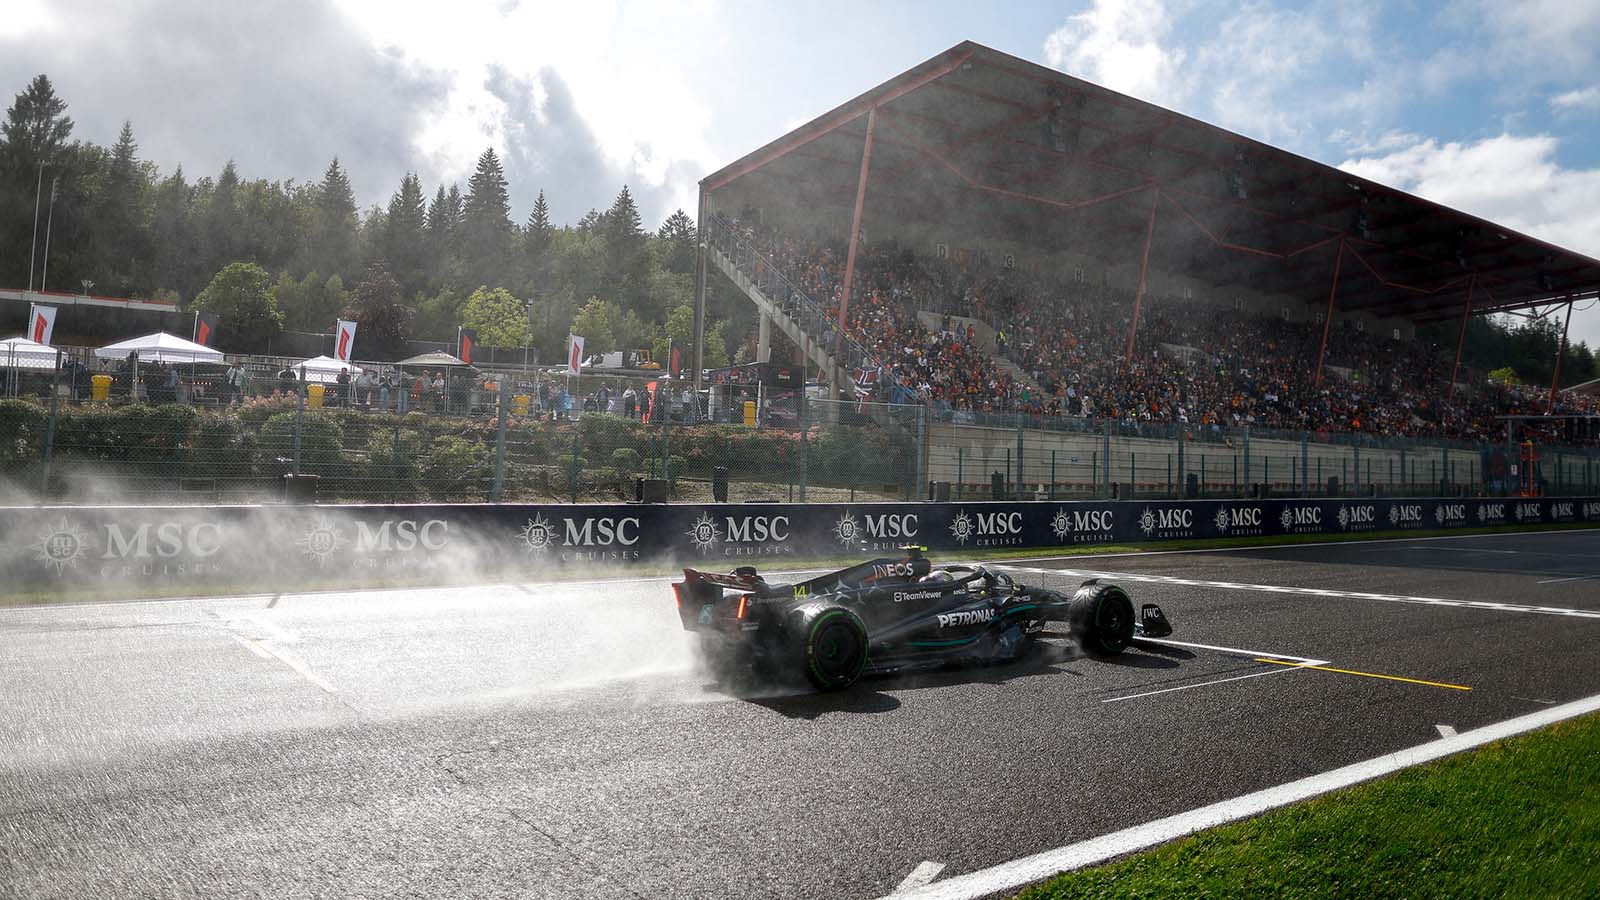 The Mercedes W14 passes the grandstand at the Belgian Grand Prix